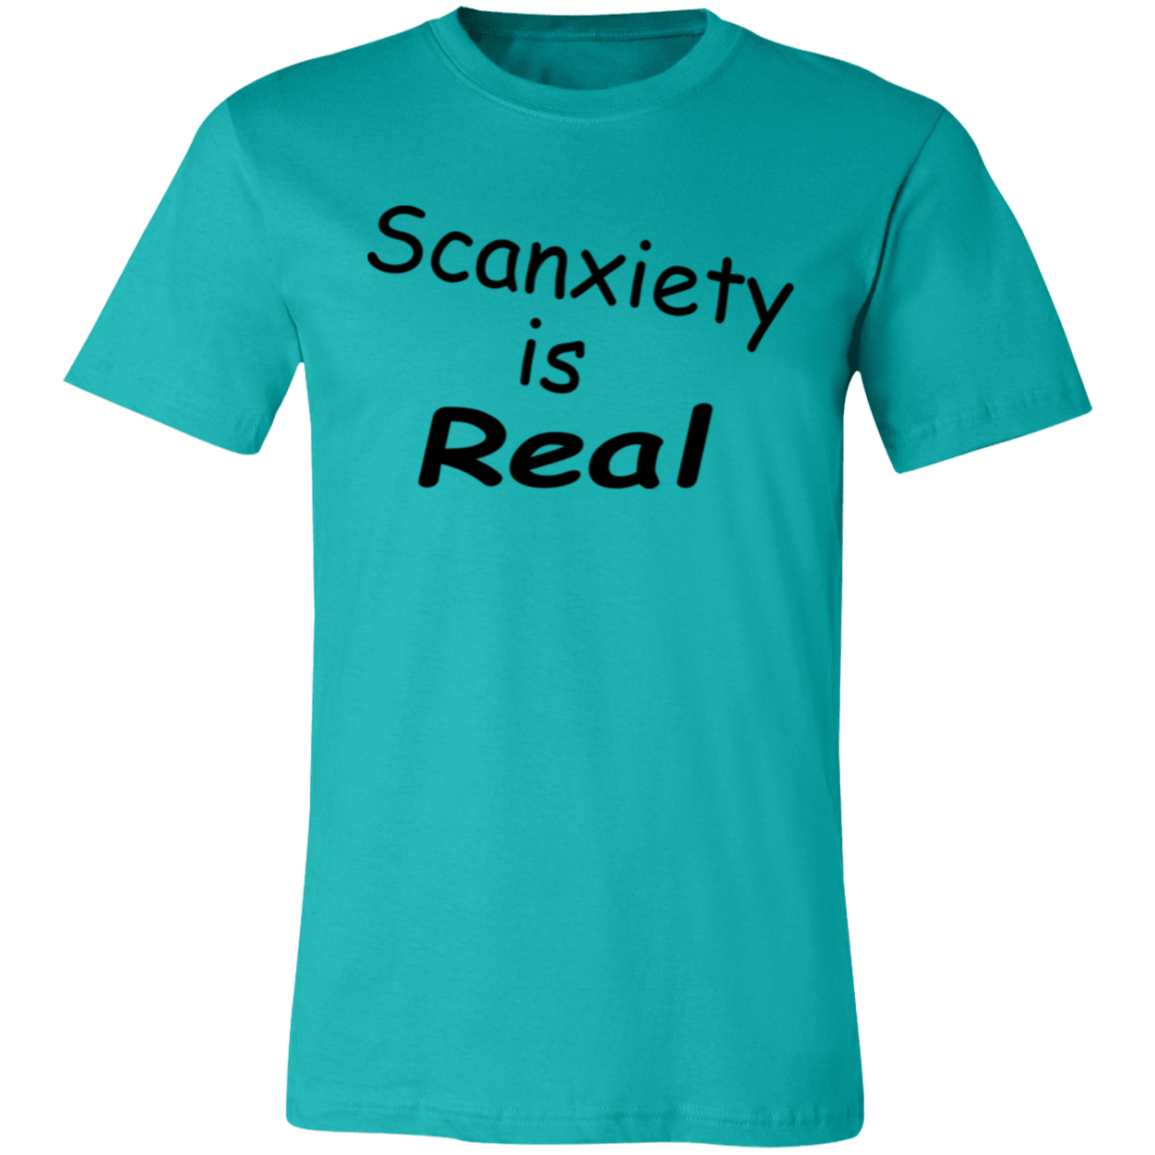 Scanxiety is Real Unisex T-Shirt